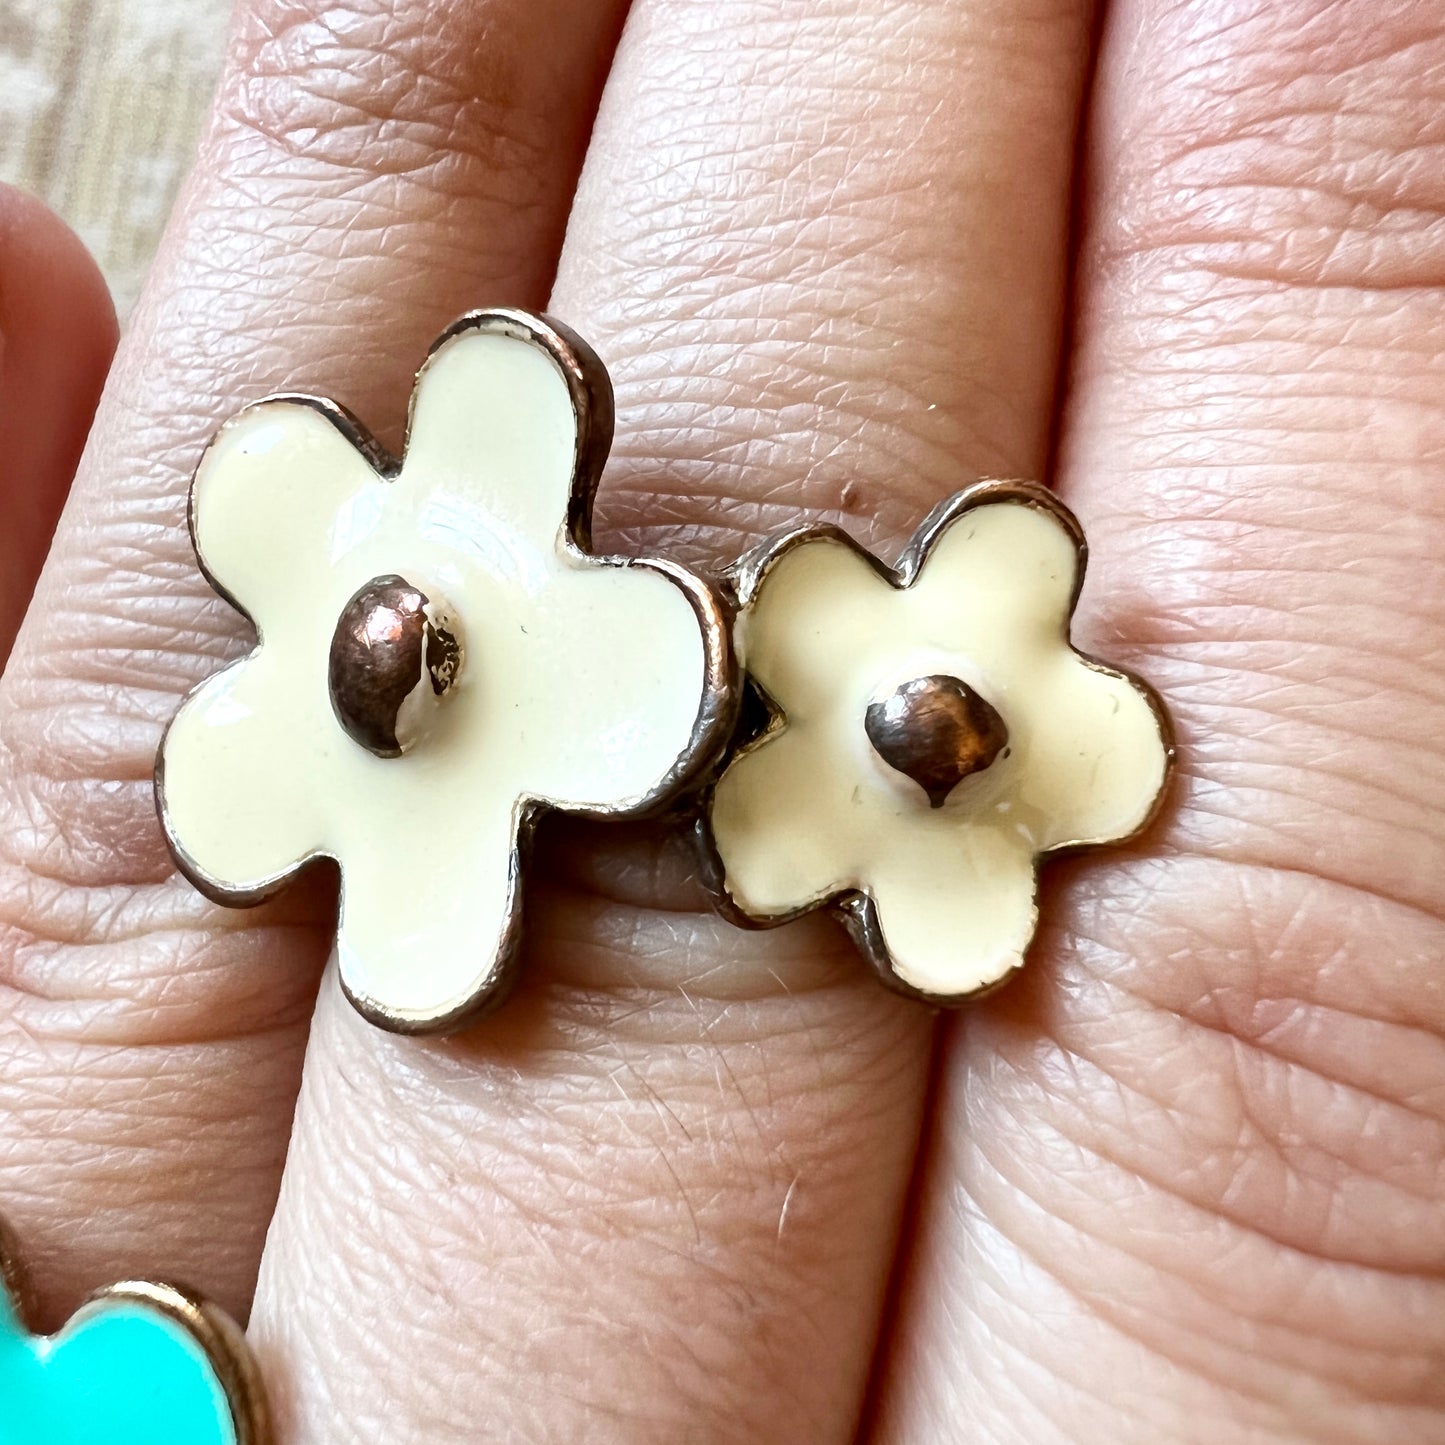 [AS-IS] 1960s Style Rings (Set of 2)